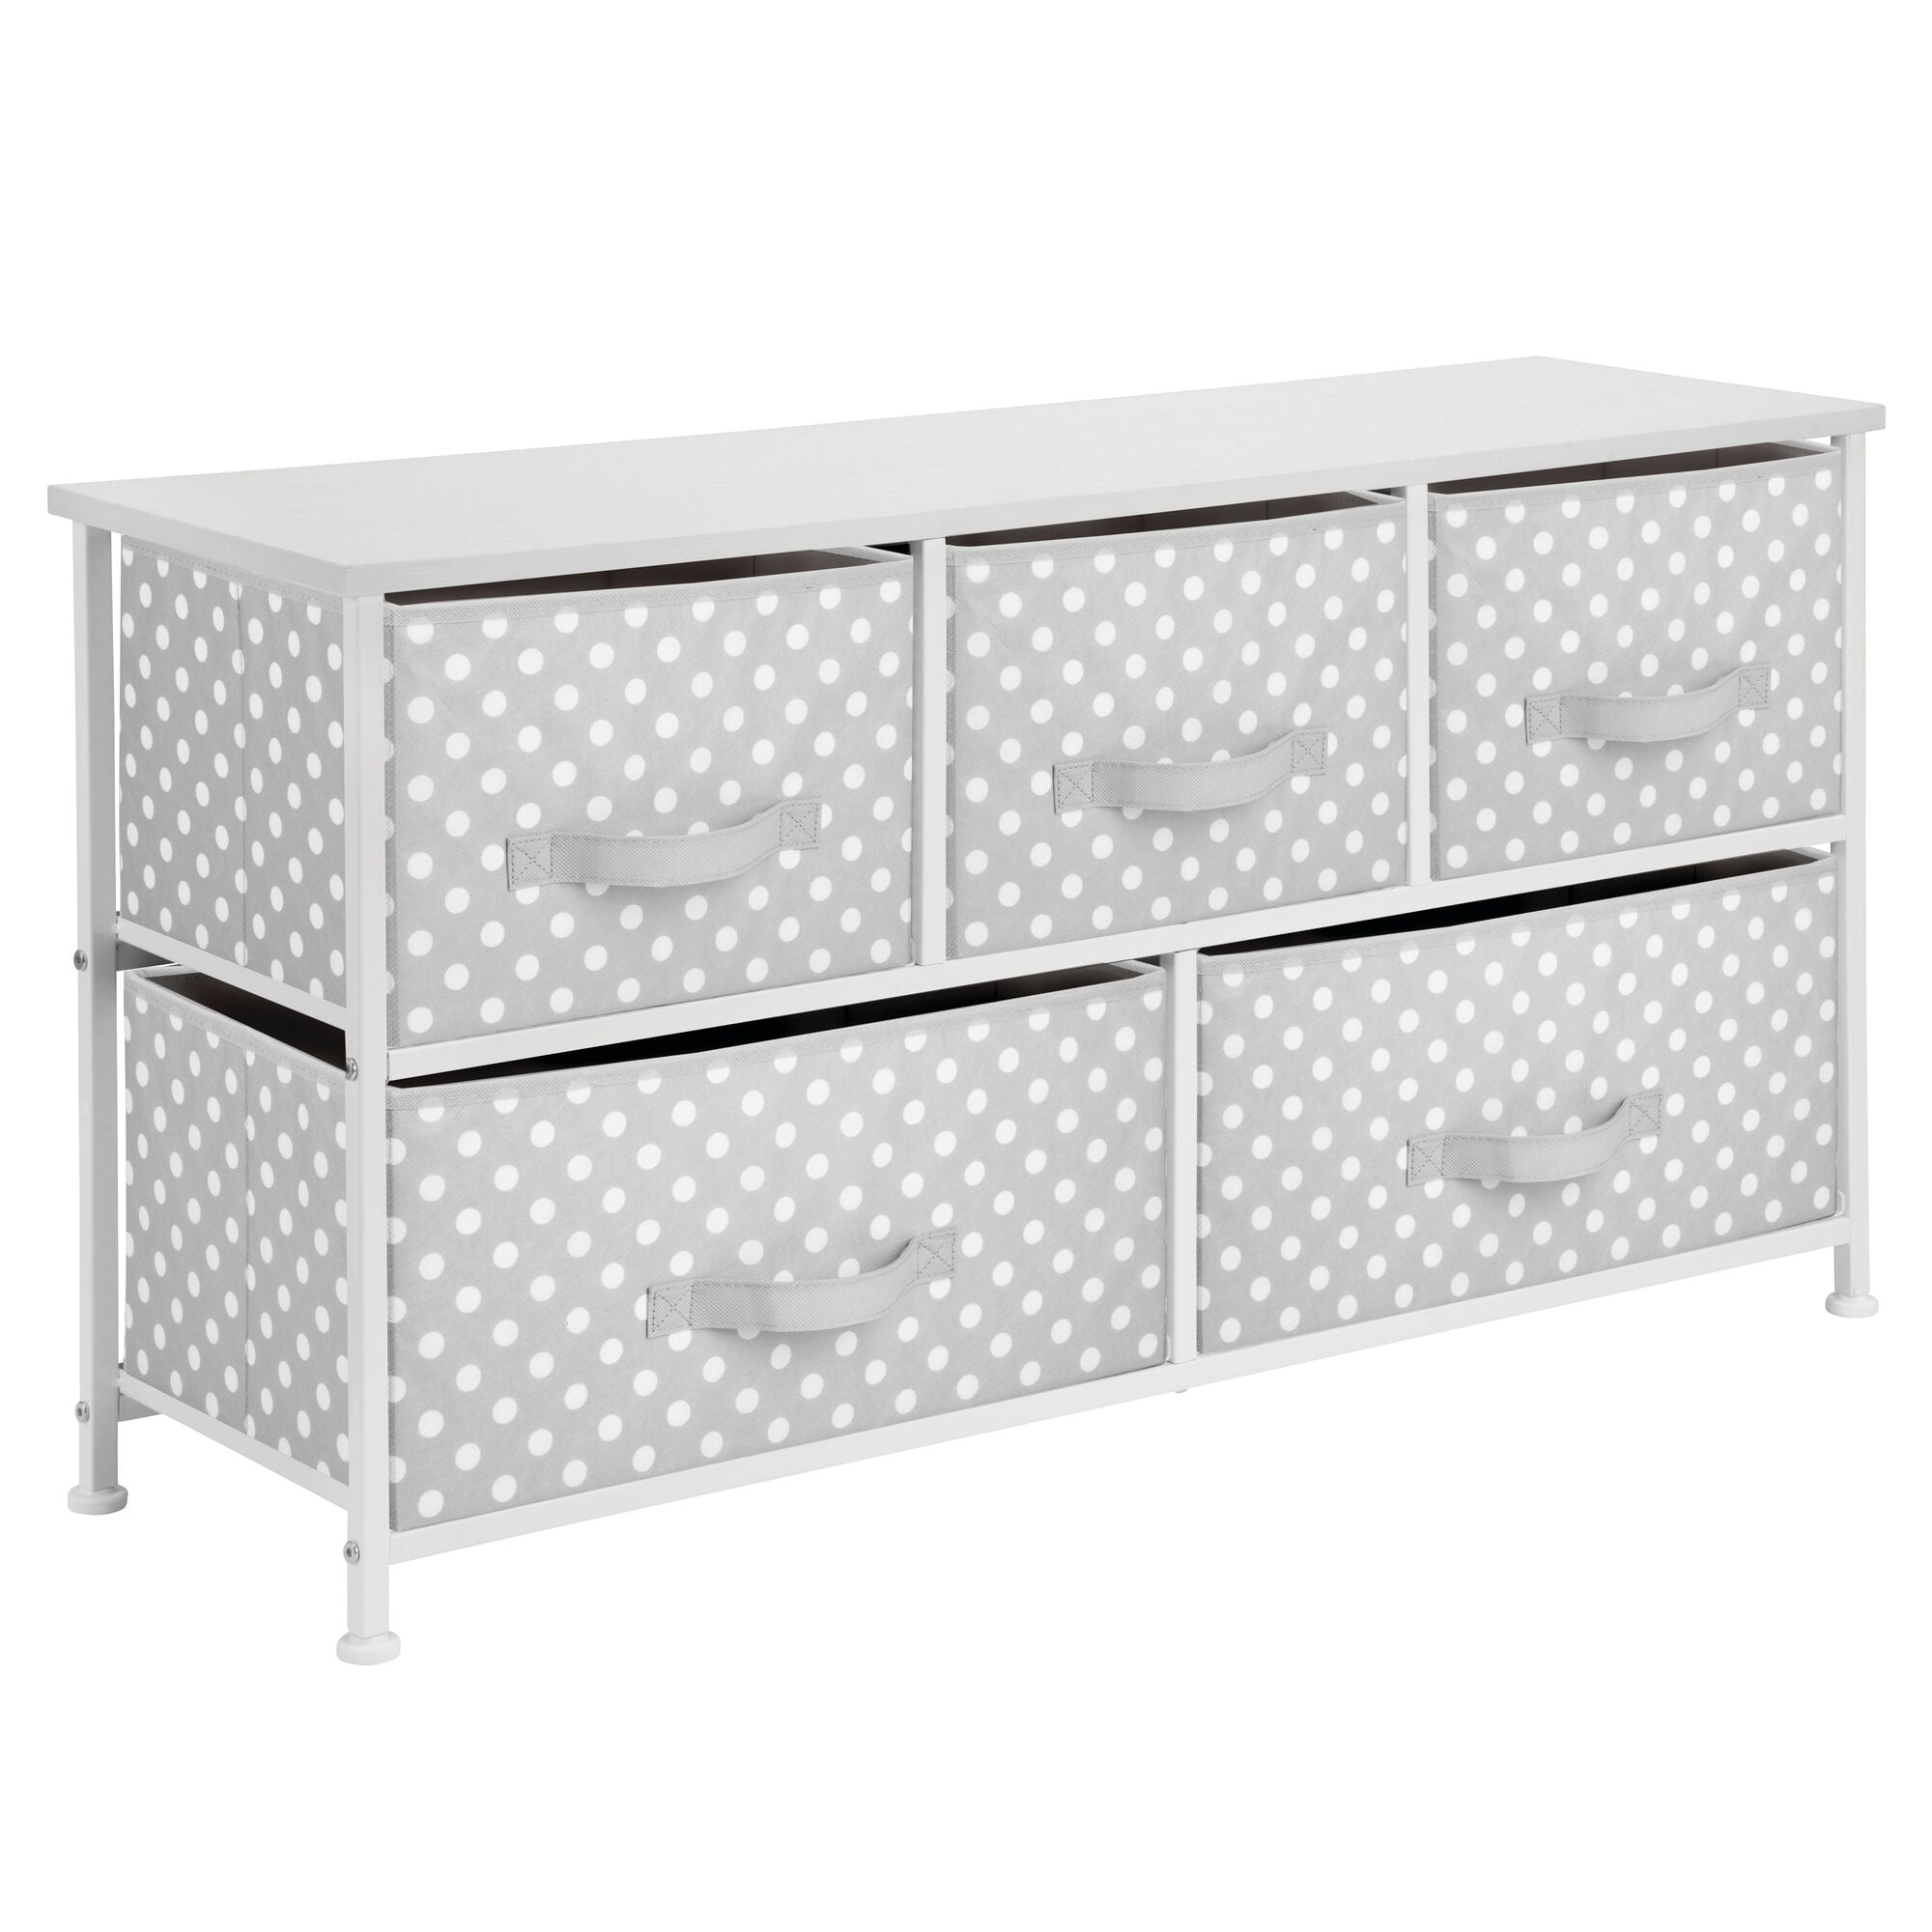 Wood Top mDesign Wide Dresser 5 Drawers Storage Furniture Turquoise Blue with White Dots Polka Dot Pattern 32.6 W Organizer for Child/Kids Room or Nursery Easy Pull Fabric Bins 